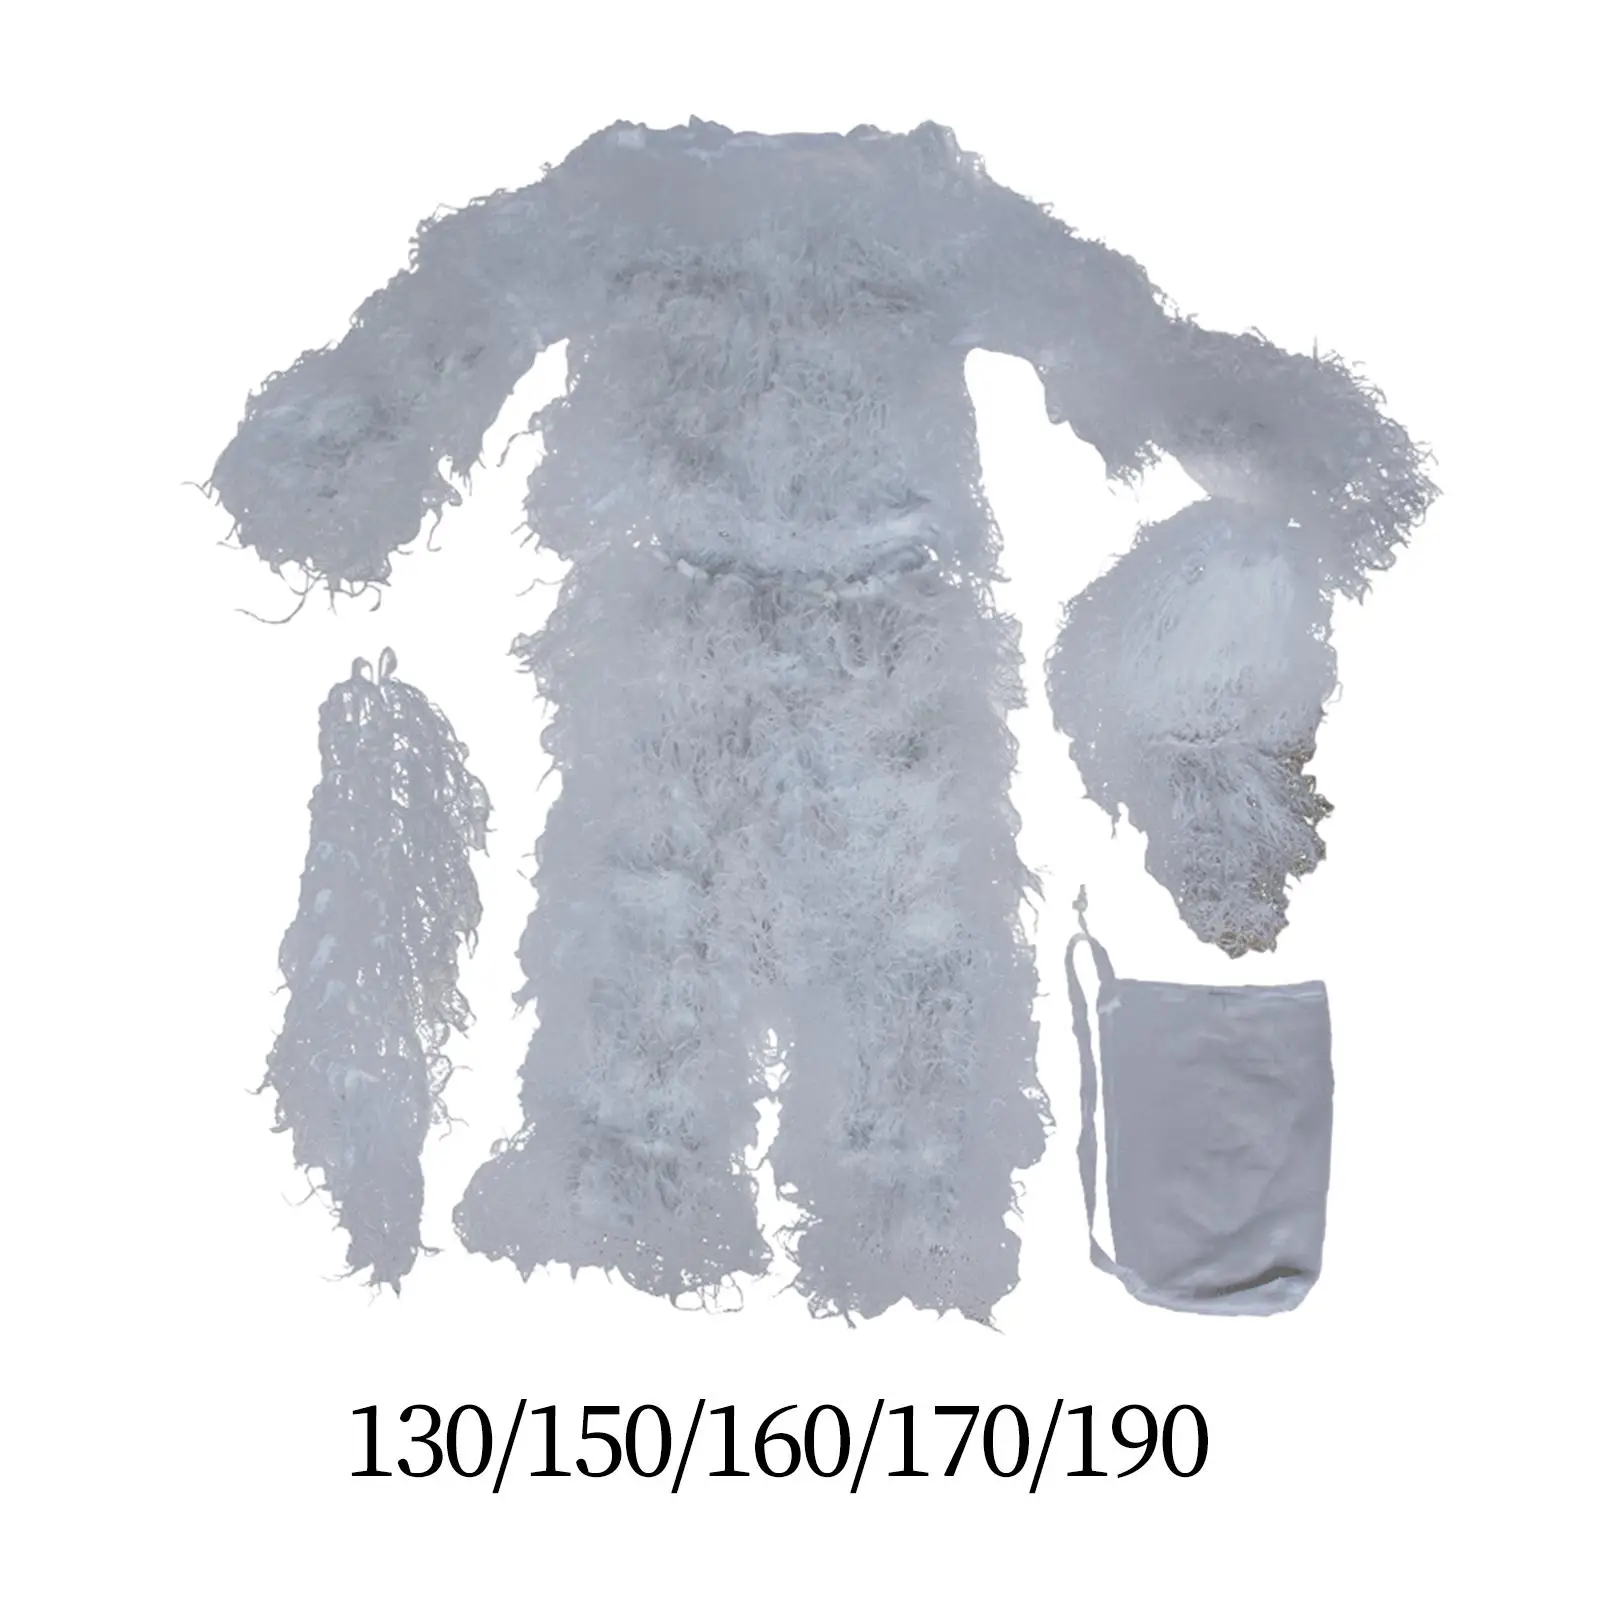 Ghillie Suit Clothes for Snowfield Outdoor Game Bird Watching